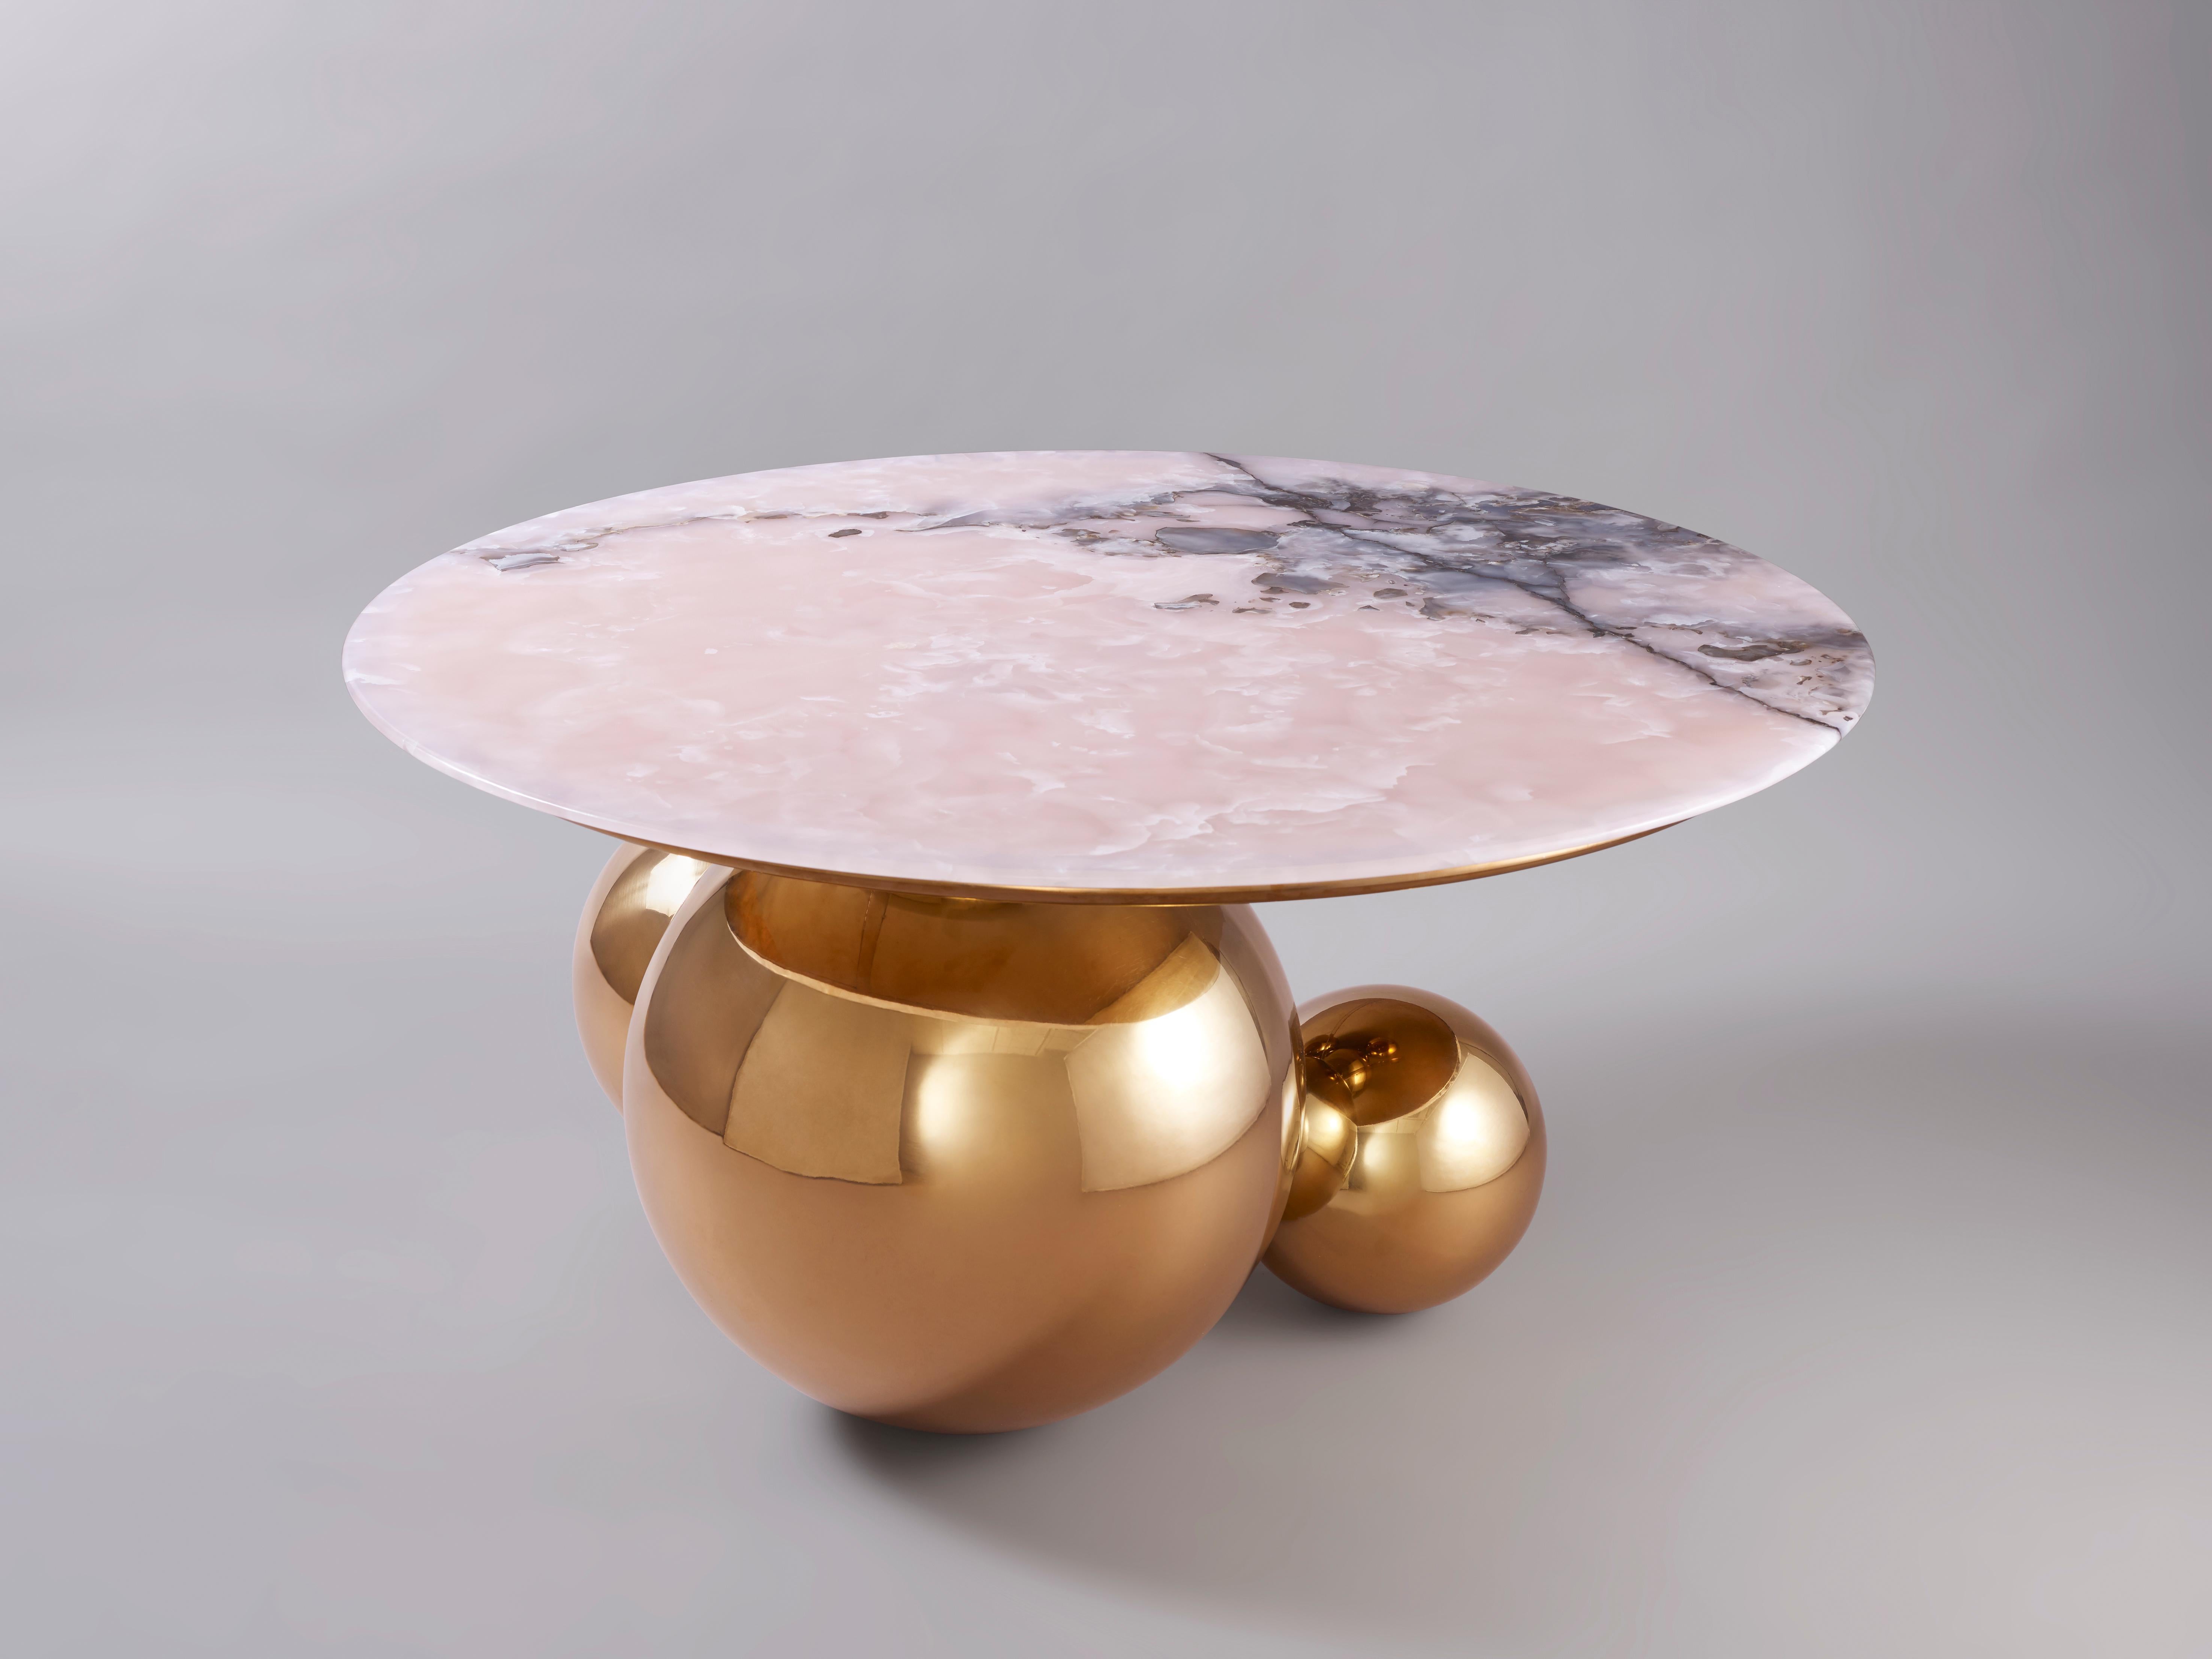 Chinese JinShi Pink Jade Coffee Table #1 For Sale